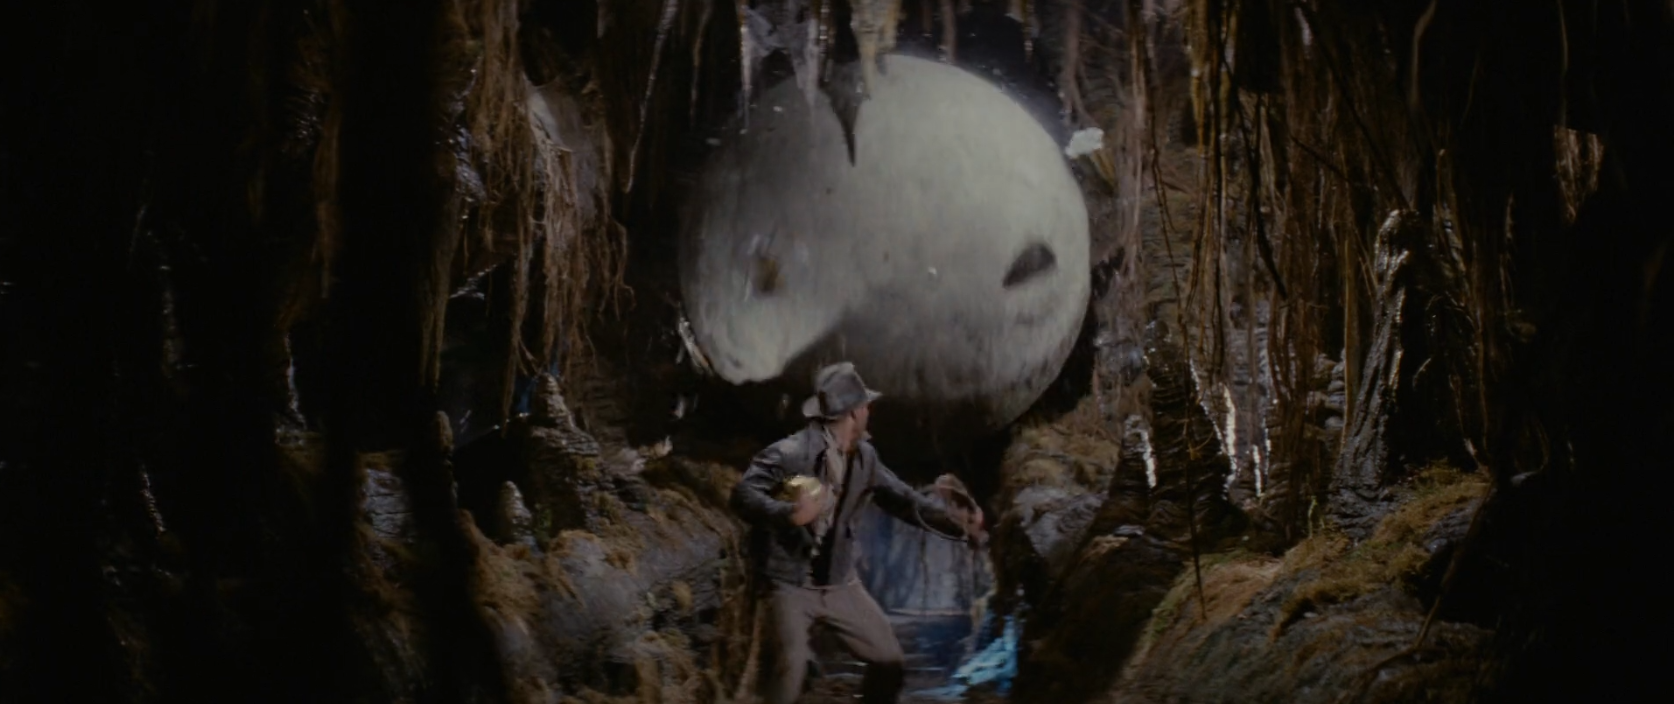 Indiana Jones and the Raiders of the Lost Ark - Big-ass boulder